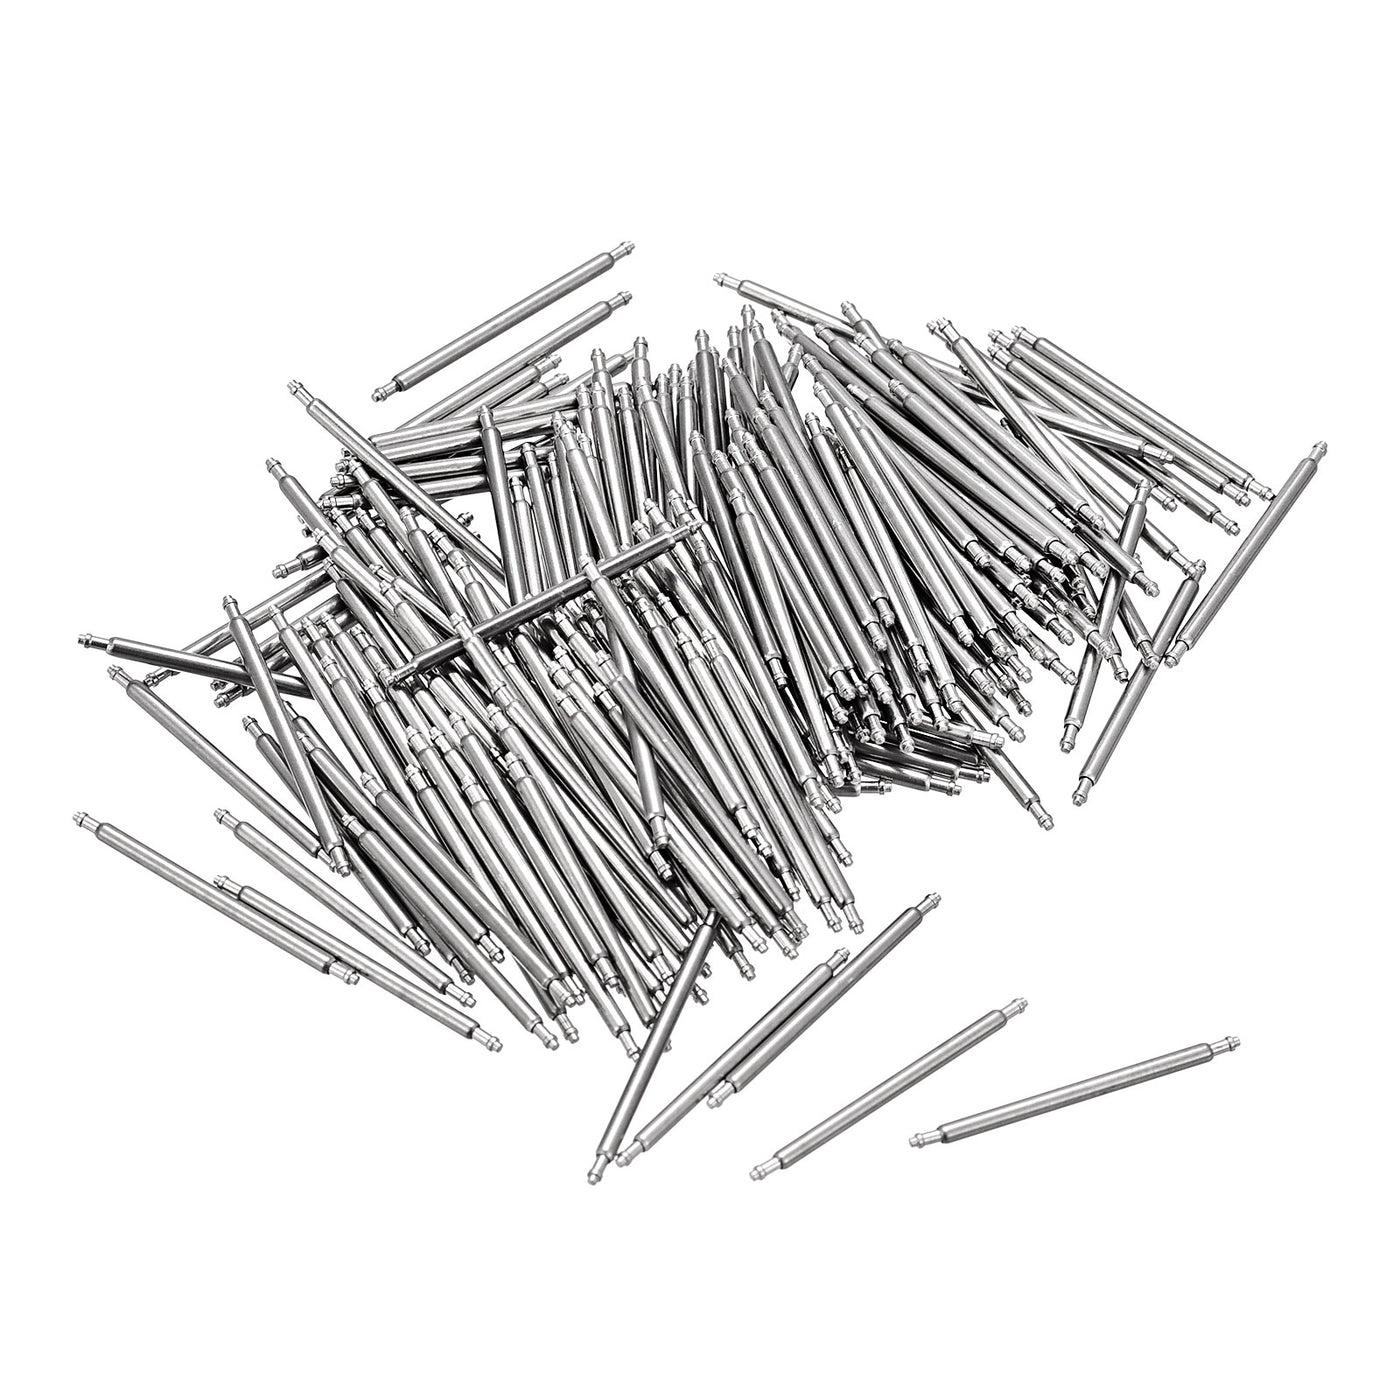 Uxcell Uxcell 22mm Watch Band Pin 1.5mm Dia Steel Single Flanged End Spring Bar Pins 200pcs